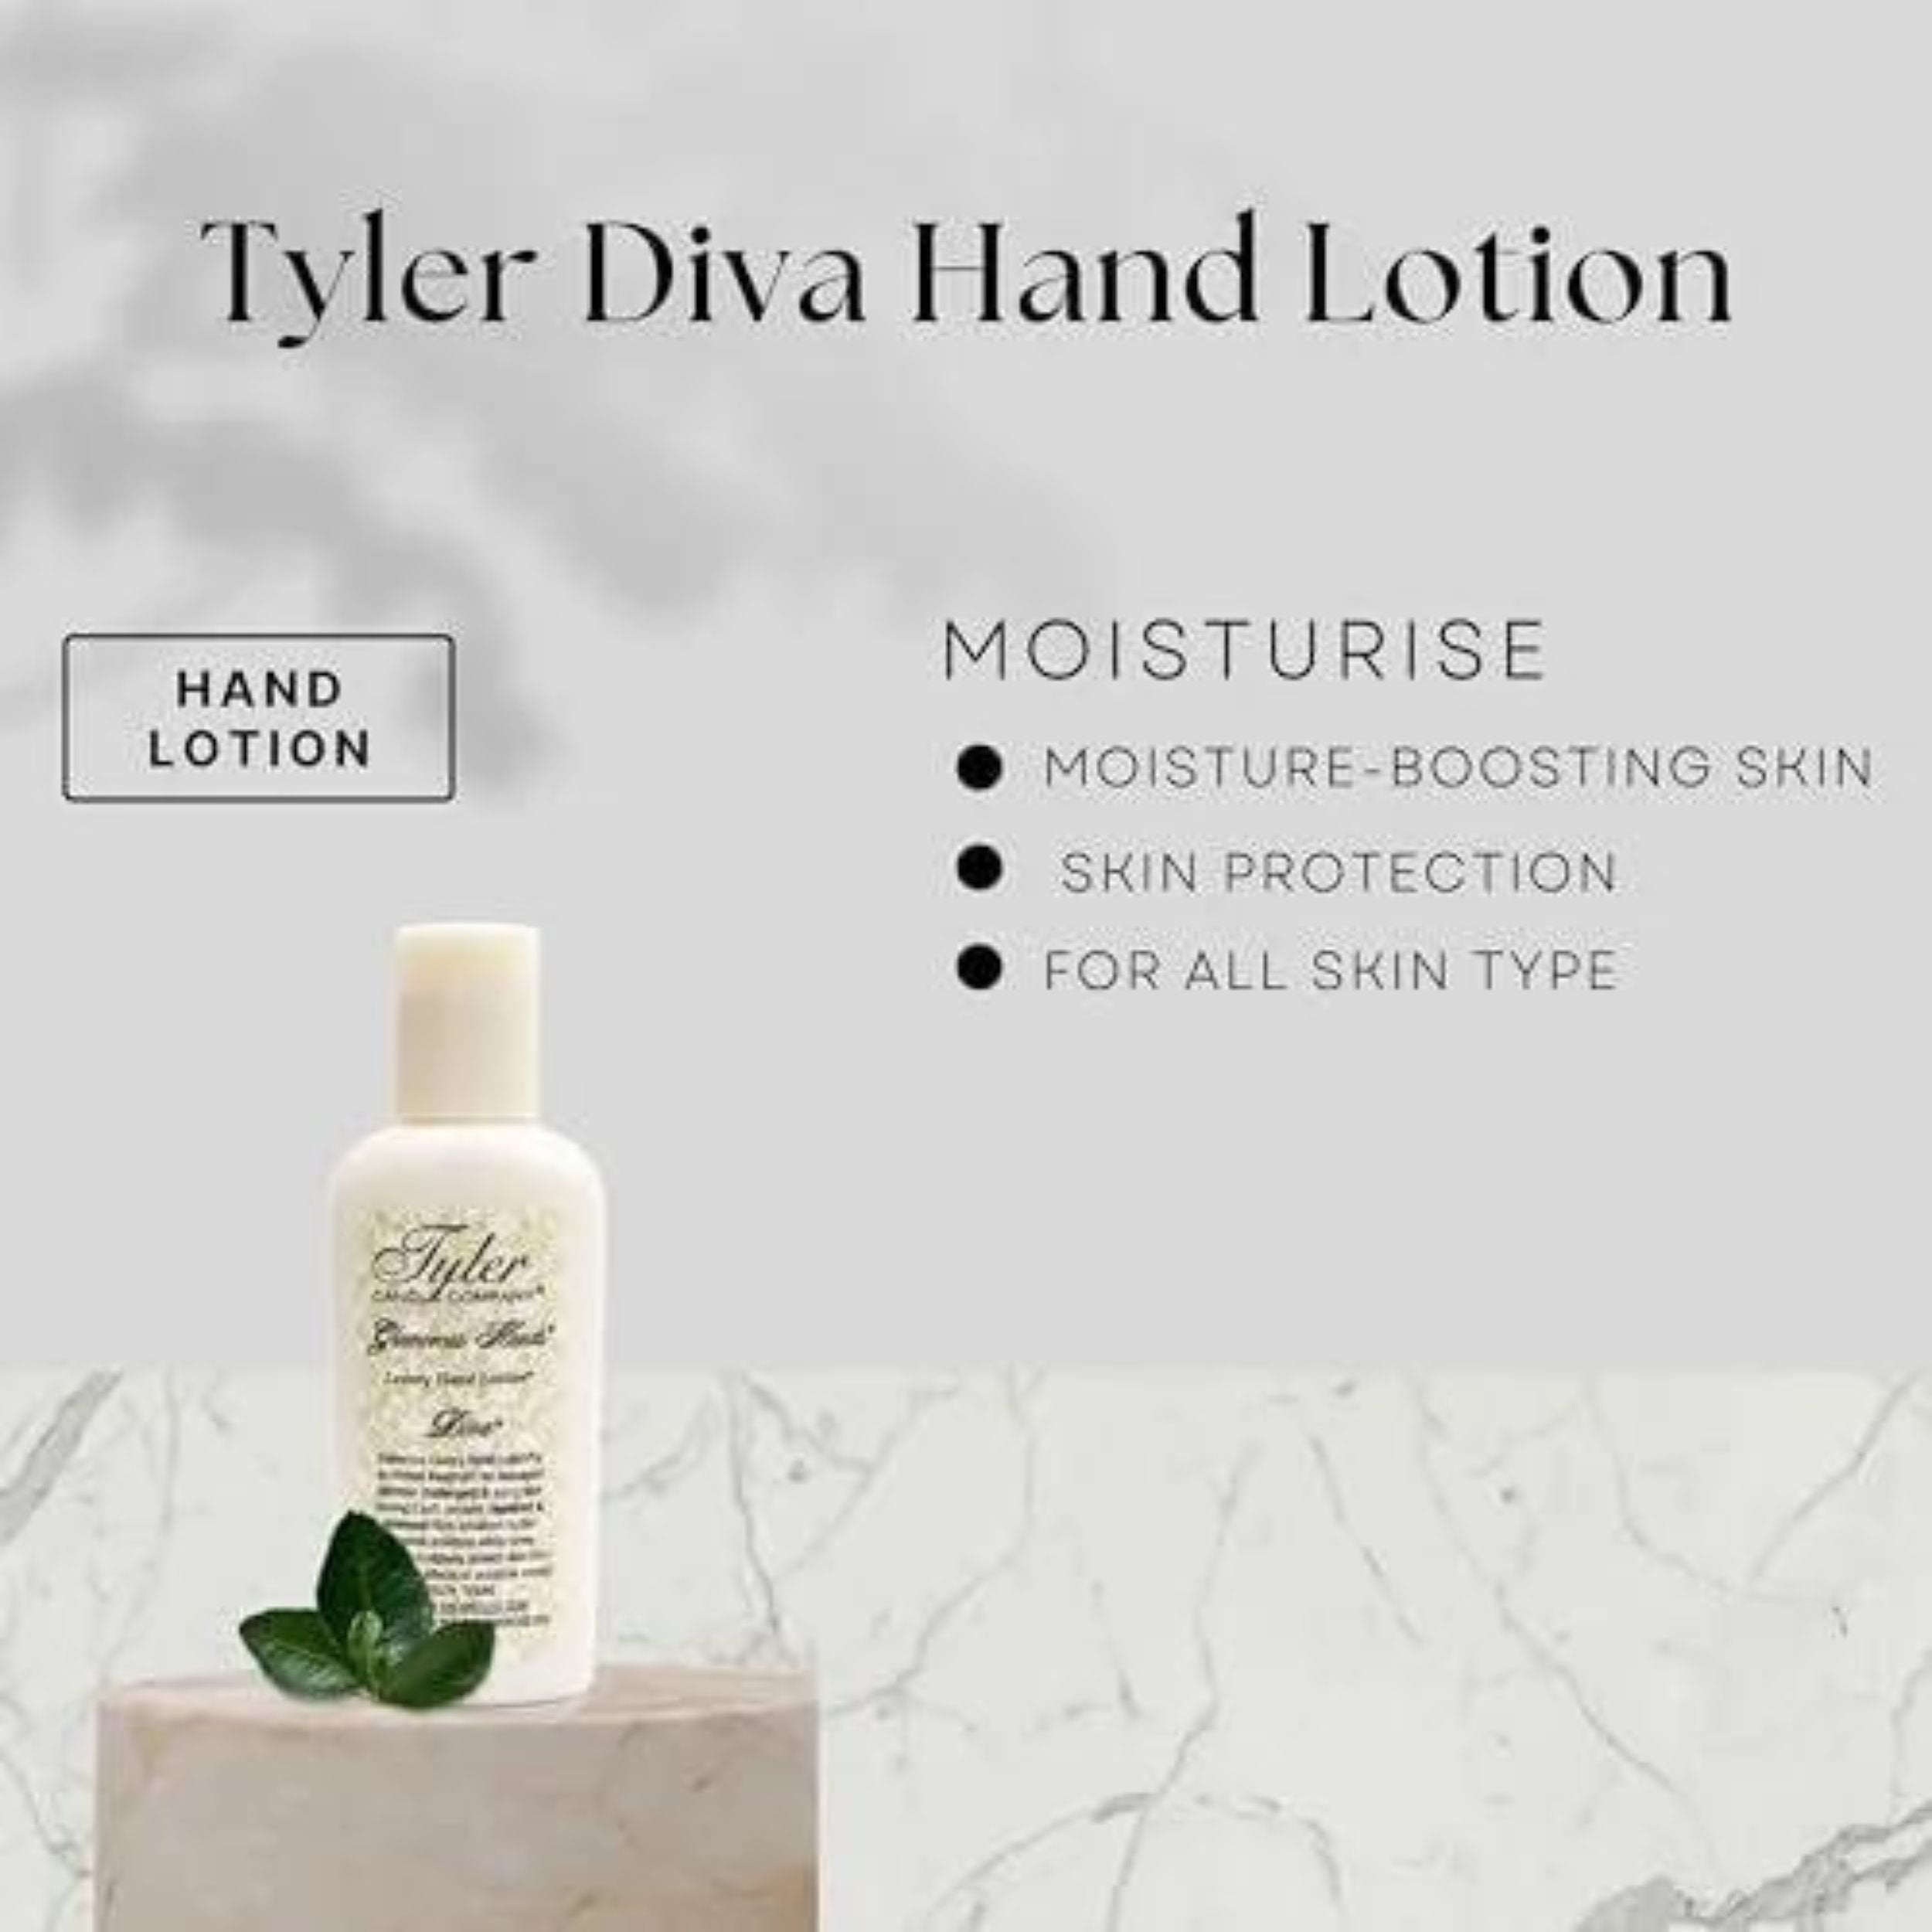 Tyler Diva Hand Lotion - Scented and Small Hand Lotion For Dry Hands with Moisture-Boosting Skin - 2 Oz Travel Size Luxury Hand Lotion and Multi-Purpose Key Chain